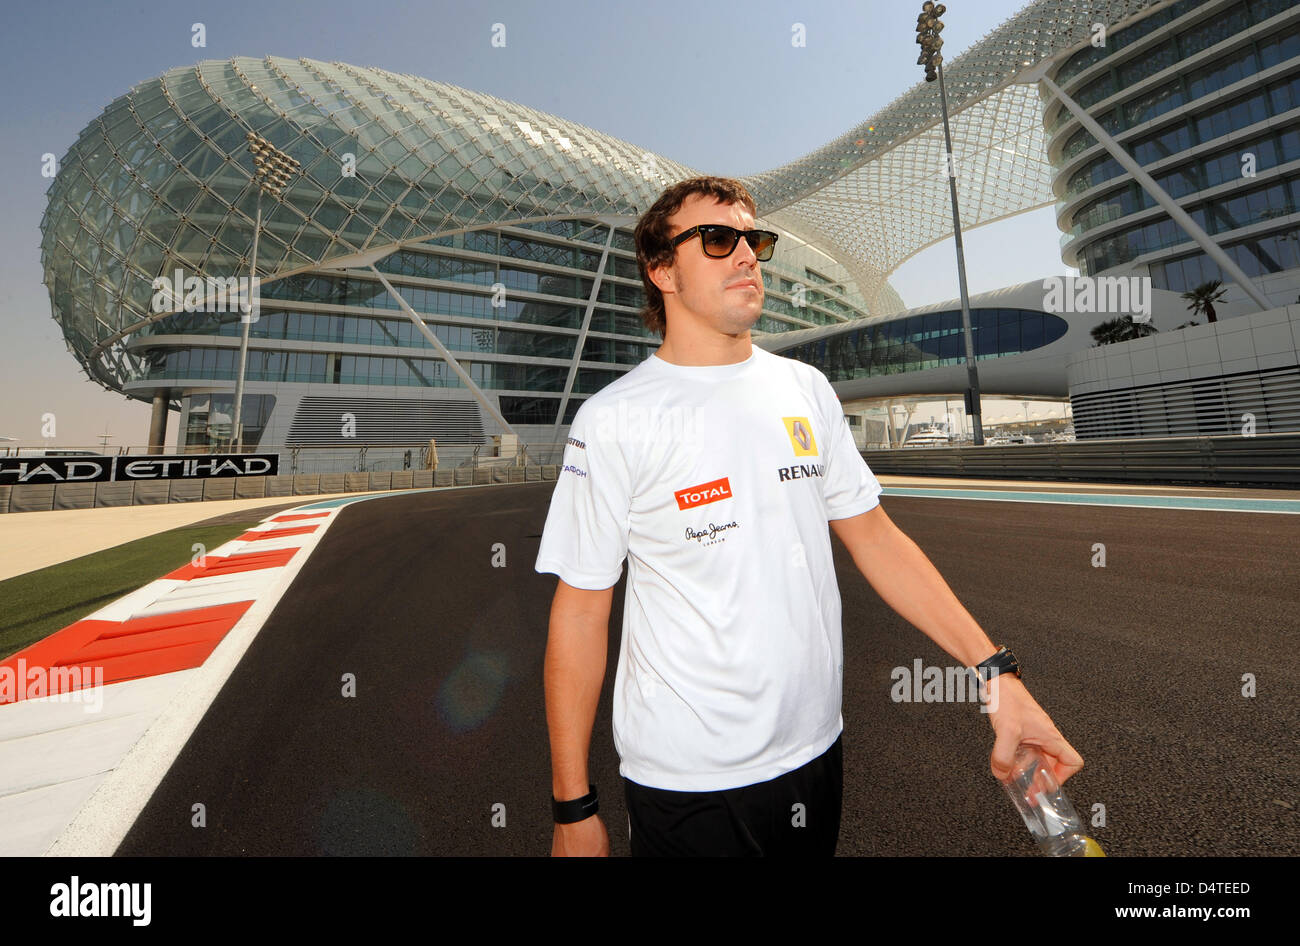 Spanish Formula One driver Fernando Alonso of Renault walks along the track at the newly built Yas Marina Circuit in Abu Dhabi, United Arab Emirates, 29 October 2009. The Abu Dhabi Grand Prix will take place for the first time on 01 November 2009. Photo: PETER STEFFEN Stock Photo